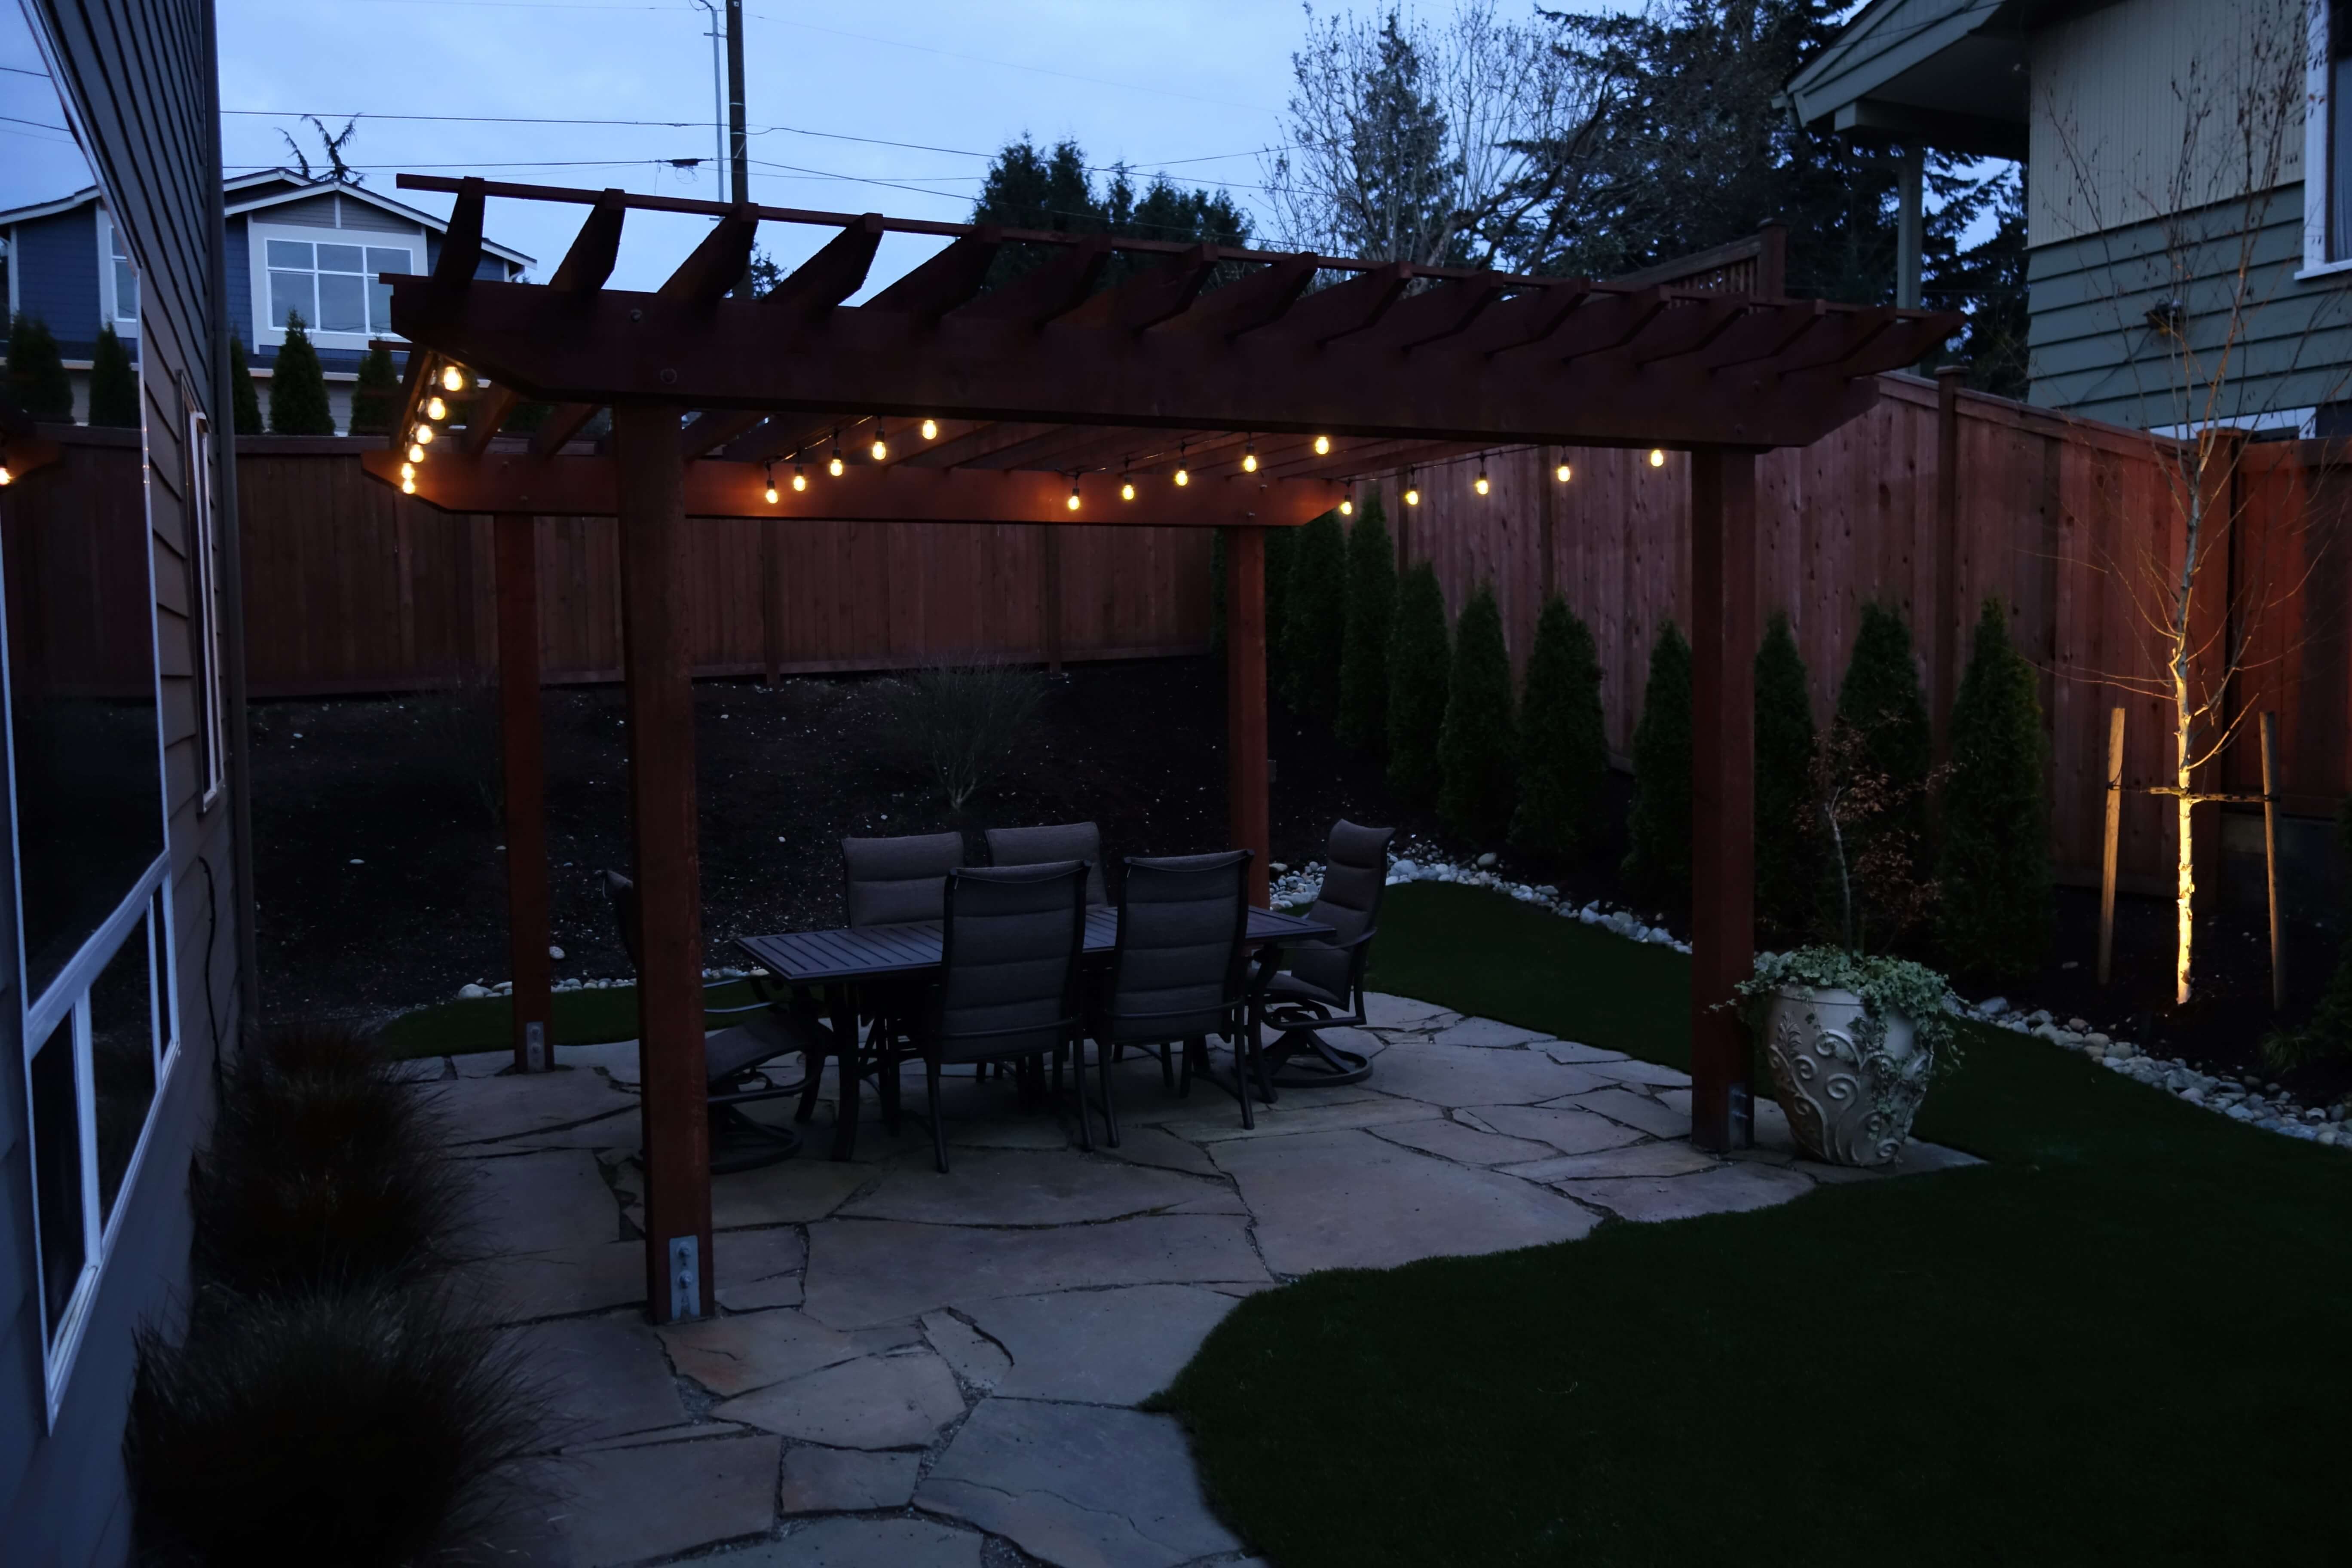 Outdoor patio with festive lights